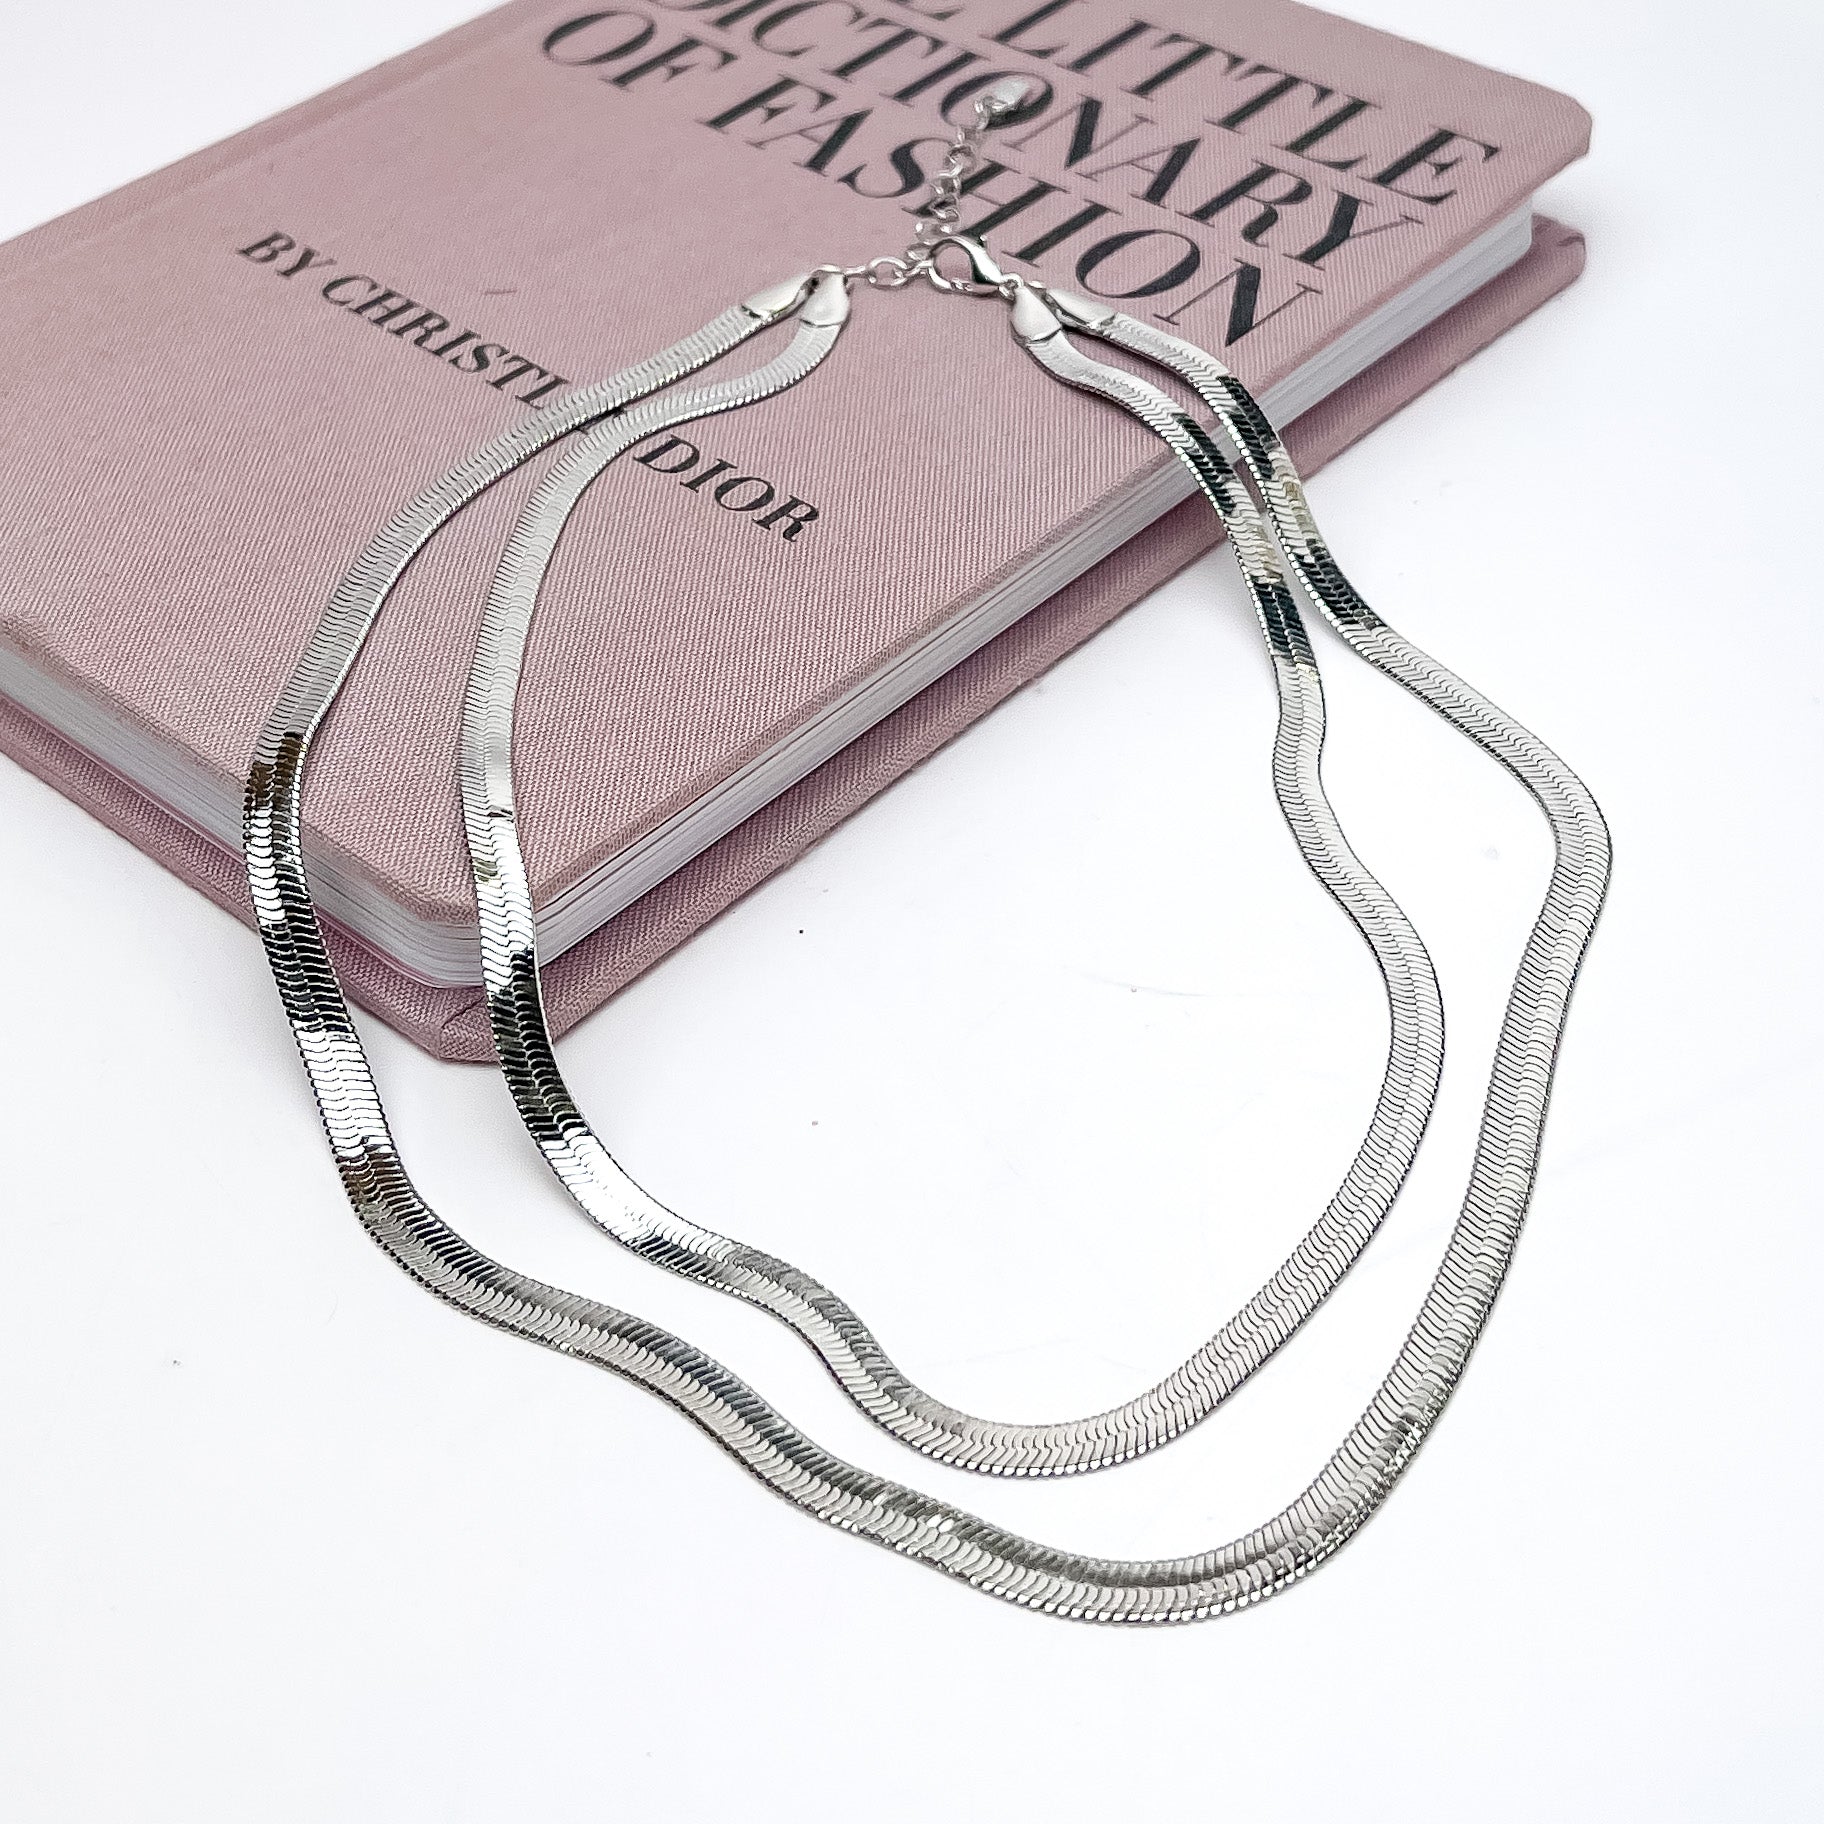 Night Life Double layered Silver Tone Chain Necklace. The necklace is pictured on a white background with part of it on a pink book.